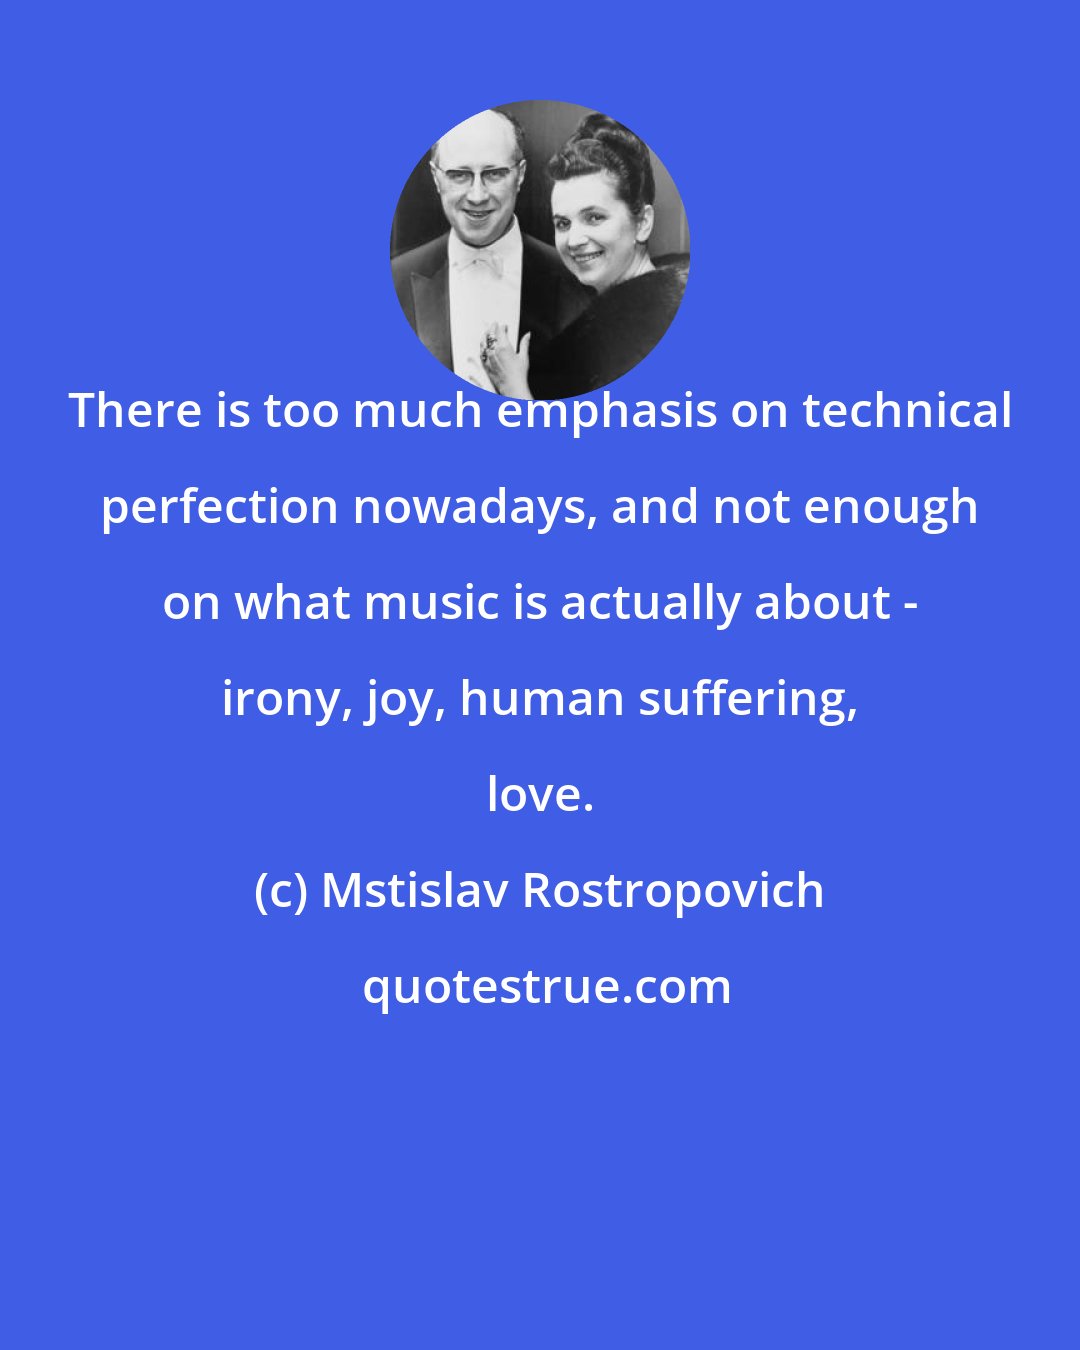 Mstislav Rostropovich: There is too much emphasis on technical perfection nowadays, and not enough on what music is actually about - irony, joy, human suffering, love.